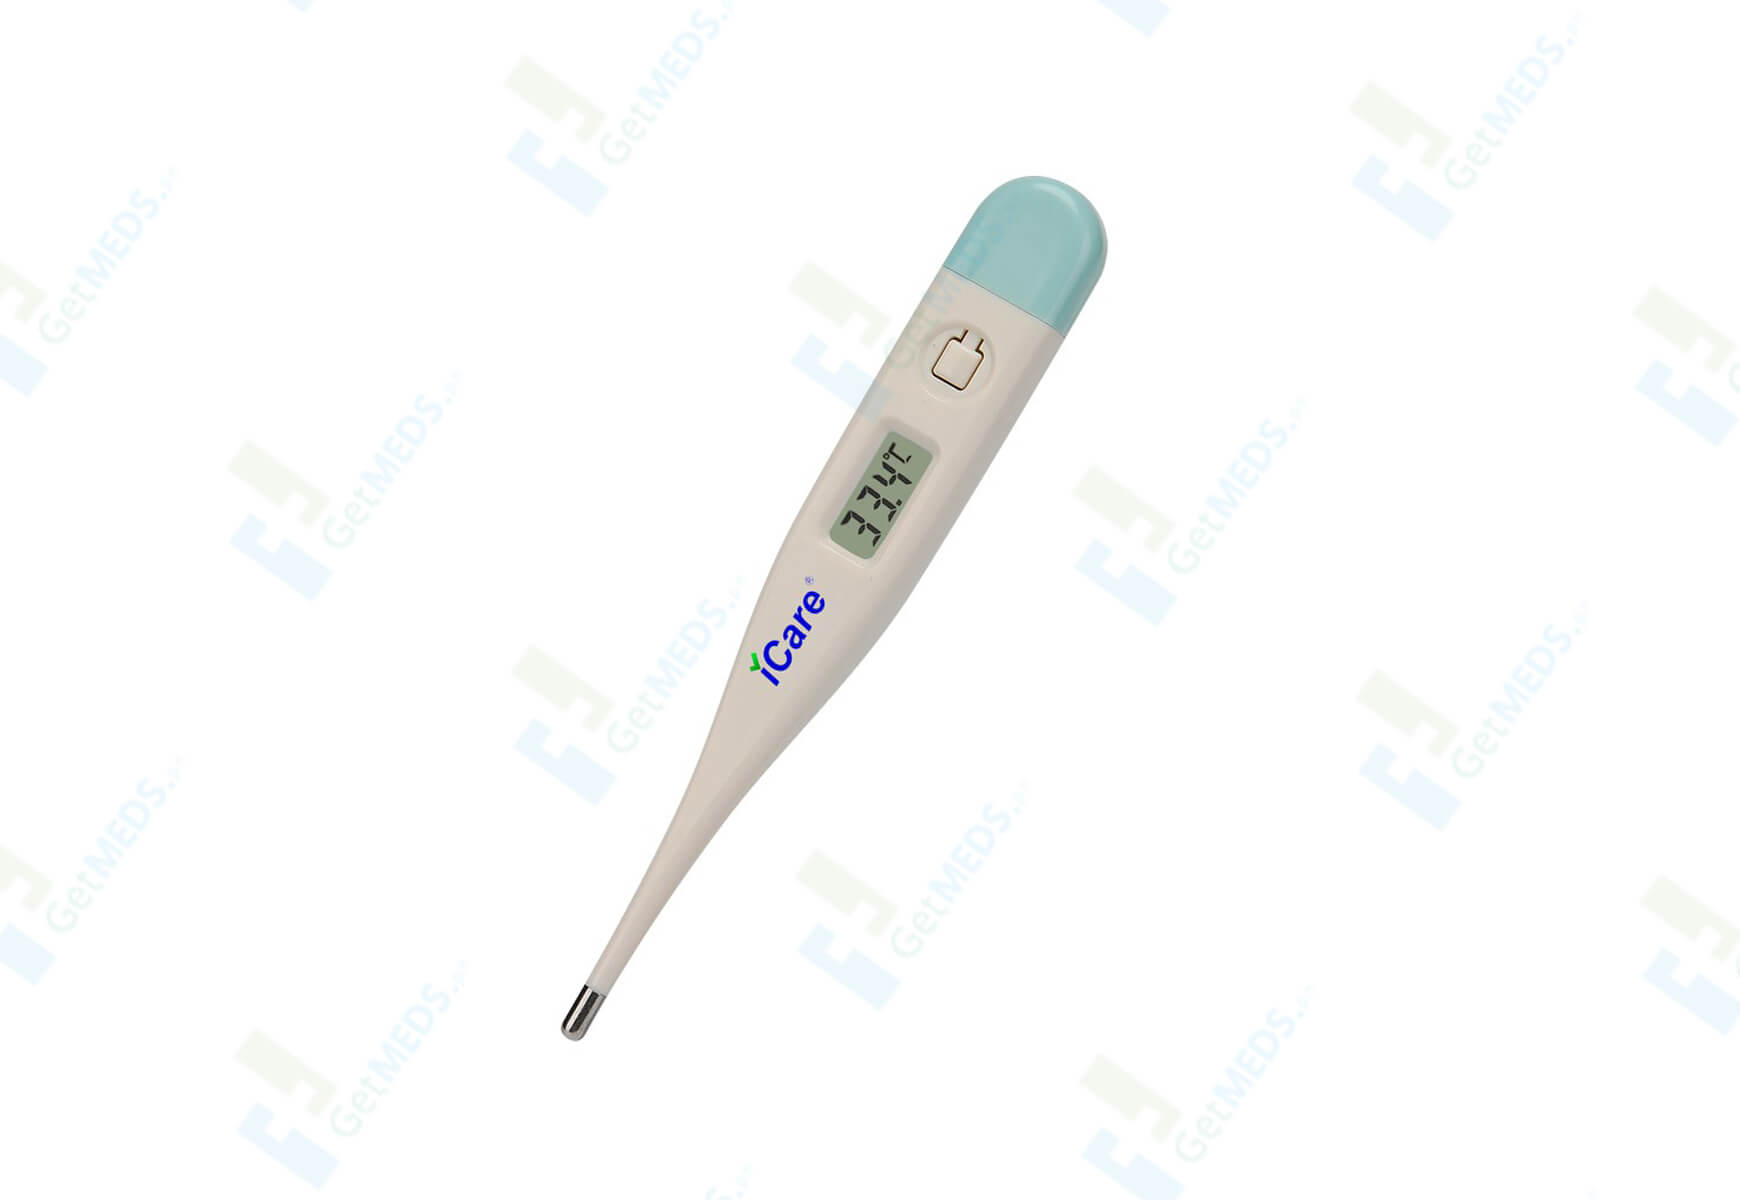 iCare Digital Thermometer